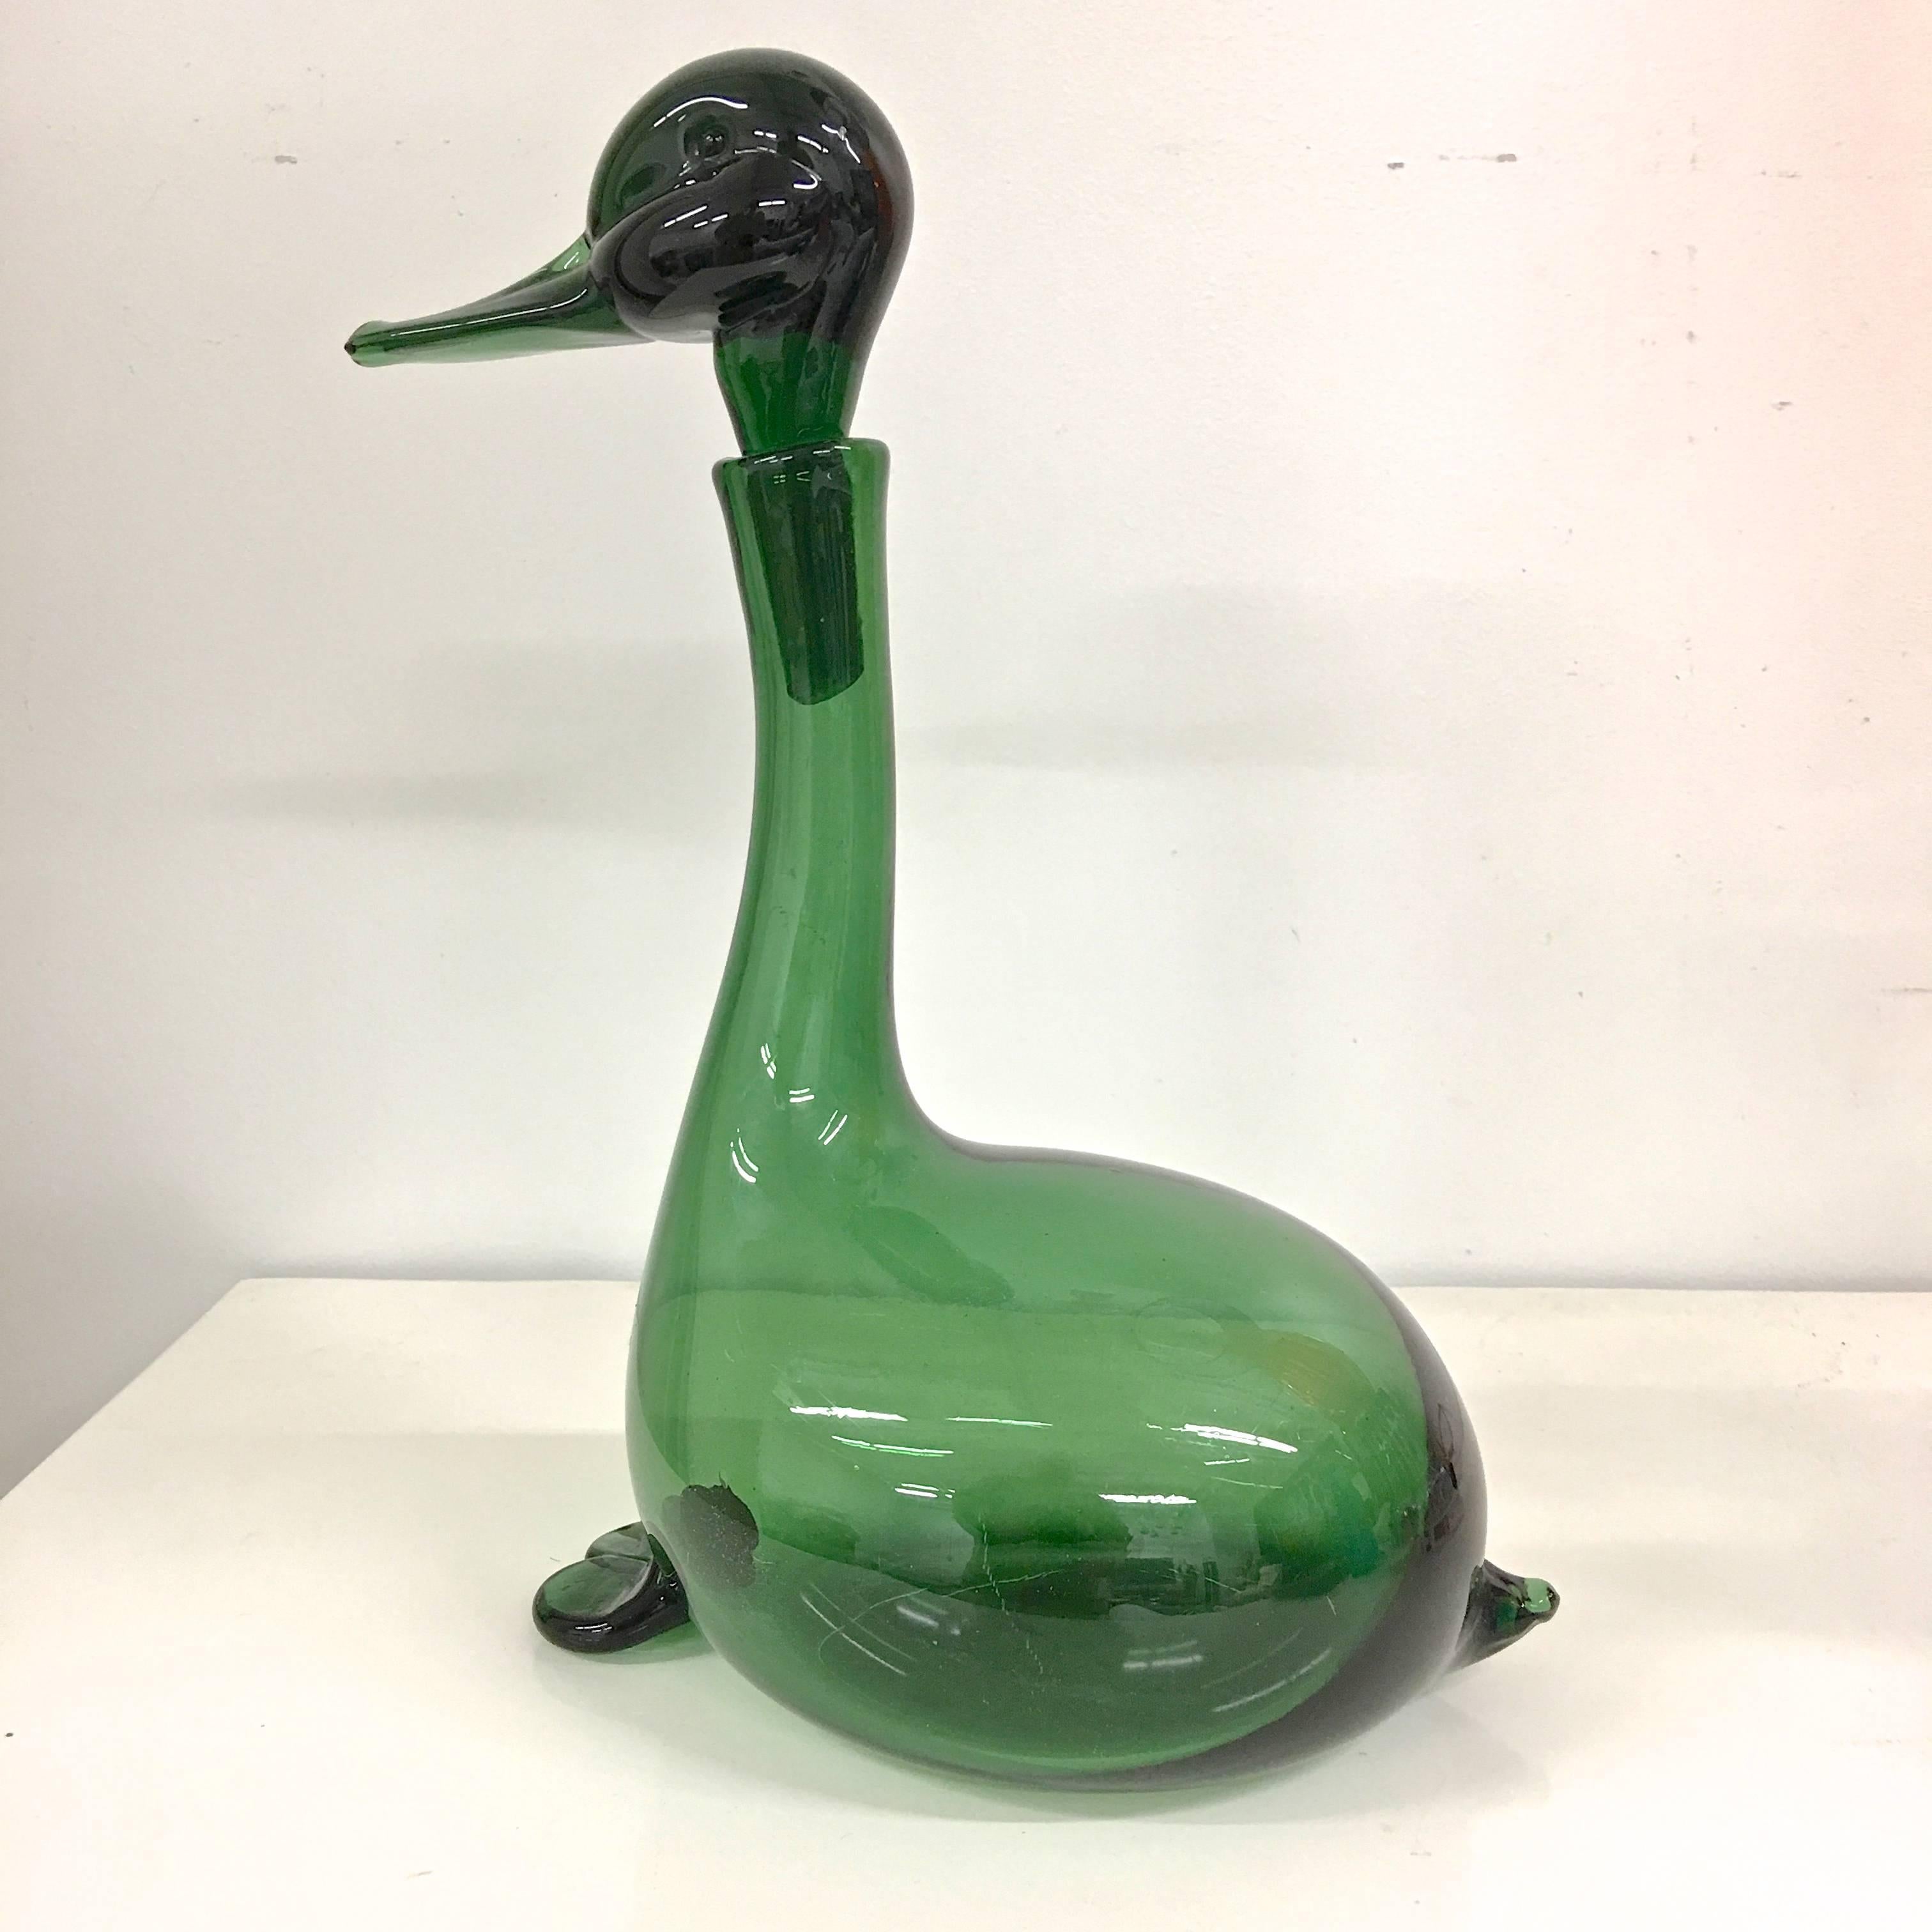 A hand blown Empoli Verde wine decanter in the shape of a duck inspired by the designs of Gio Ponti for Taddei di Empoli in the early 1950's and produced in the 1960's by Toso Bagnoli specifically for the American market.

Gio Ponti promoted the